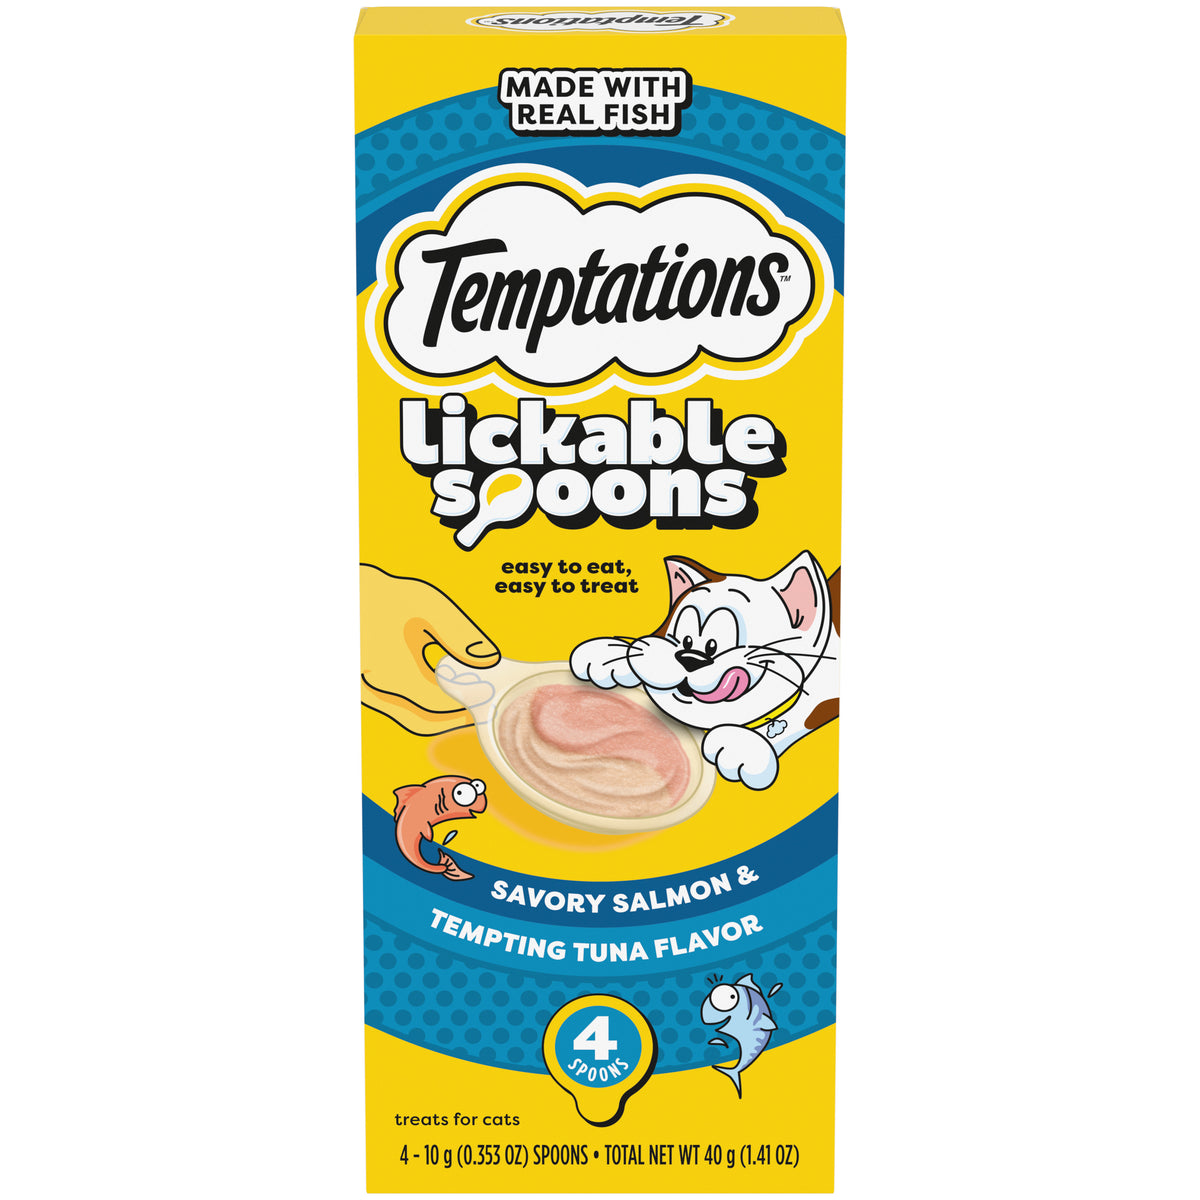 [Temptations][Temptations Lickable Spoons, Savory Salmon and Tempting Tuna Flavor, Pack of 4][Main Image (Front)]